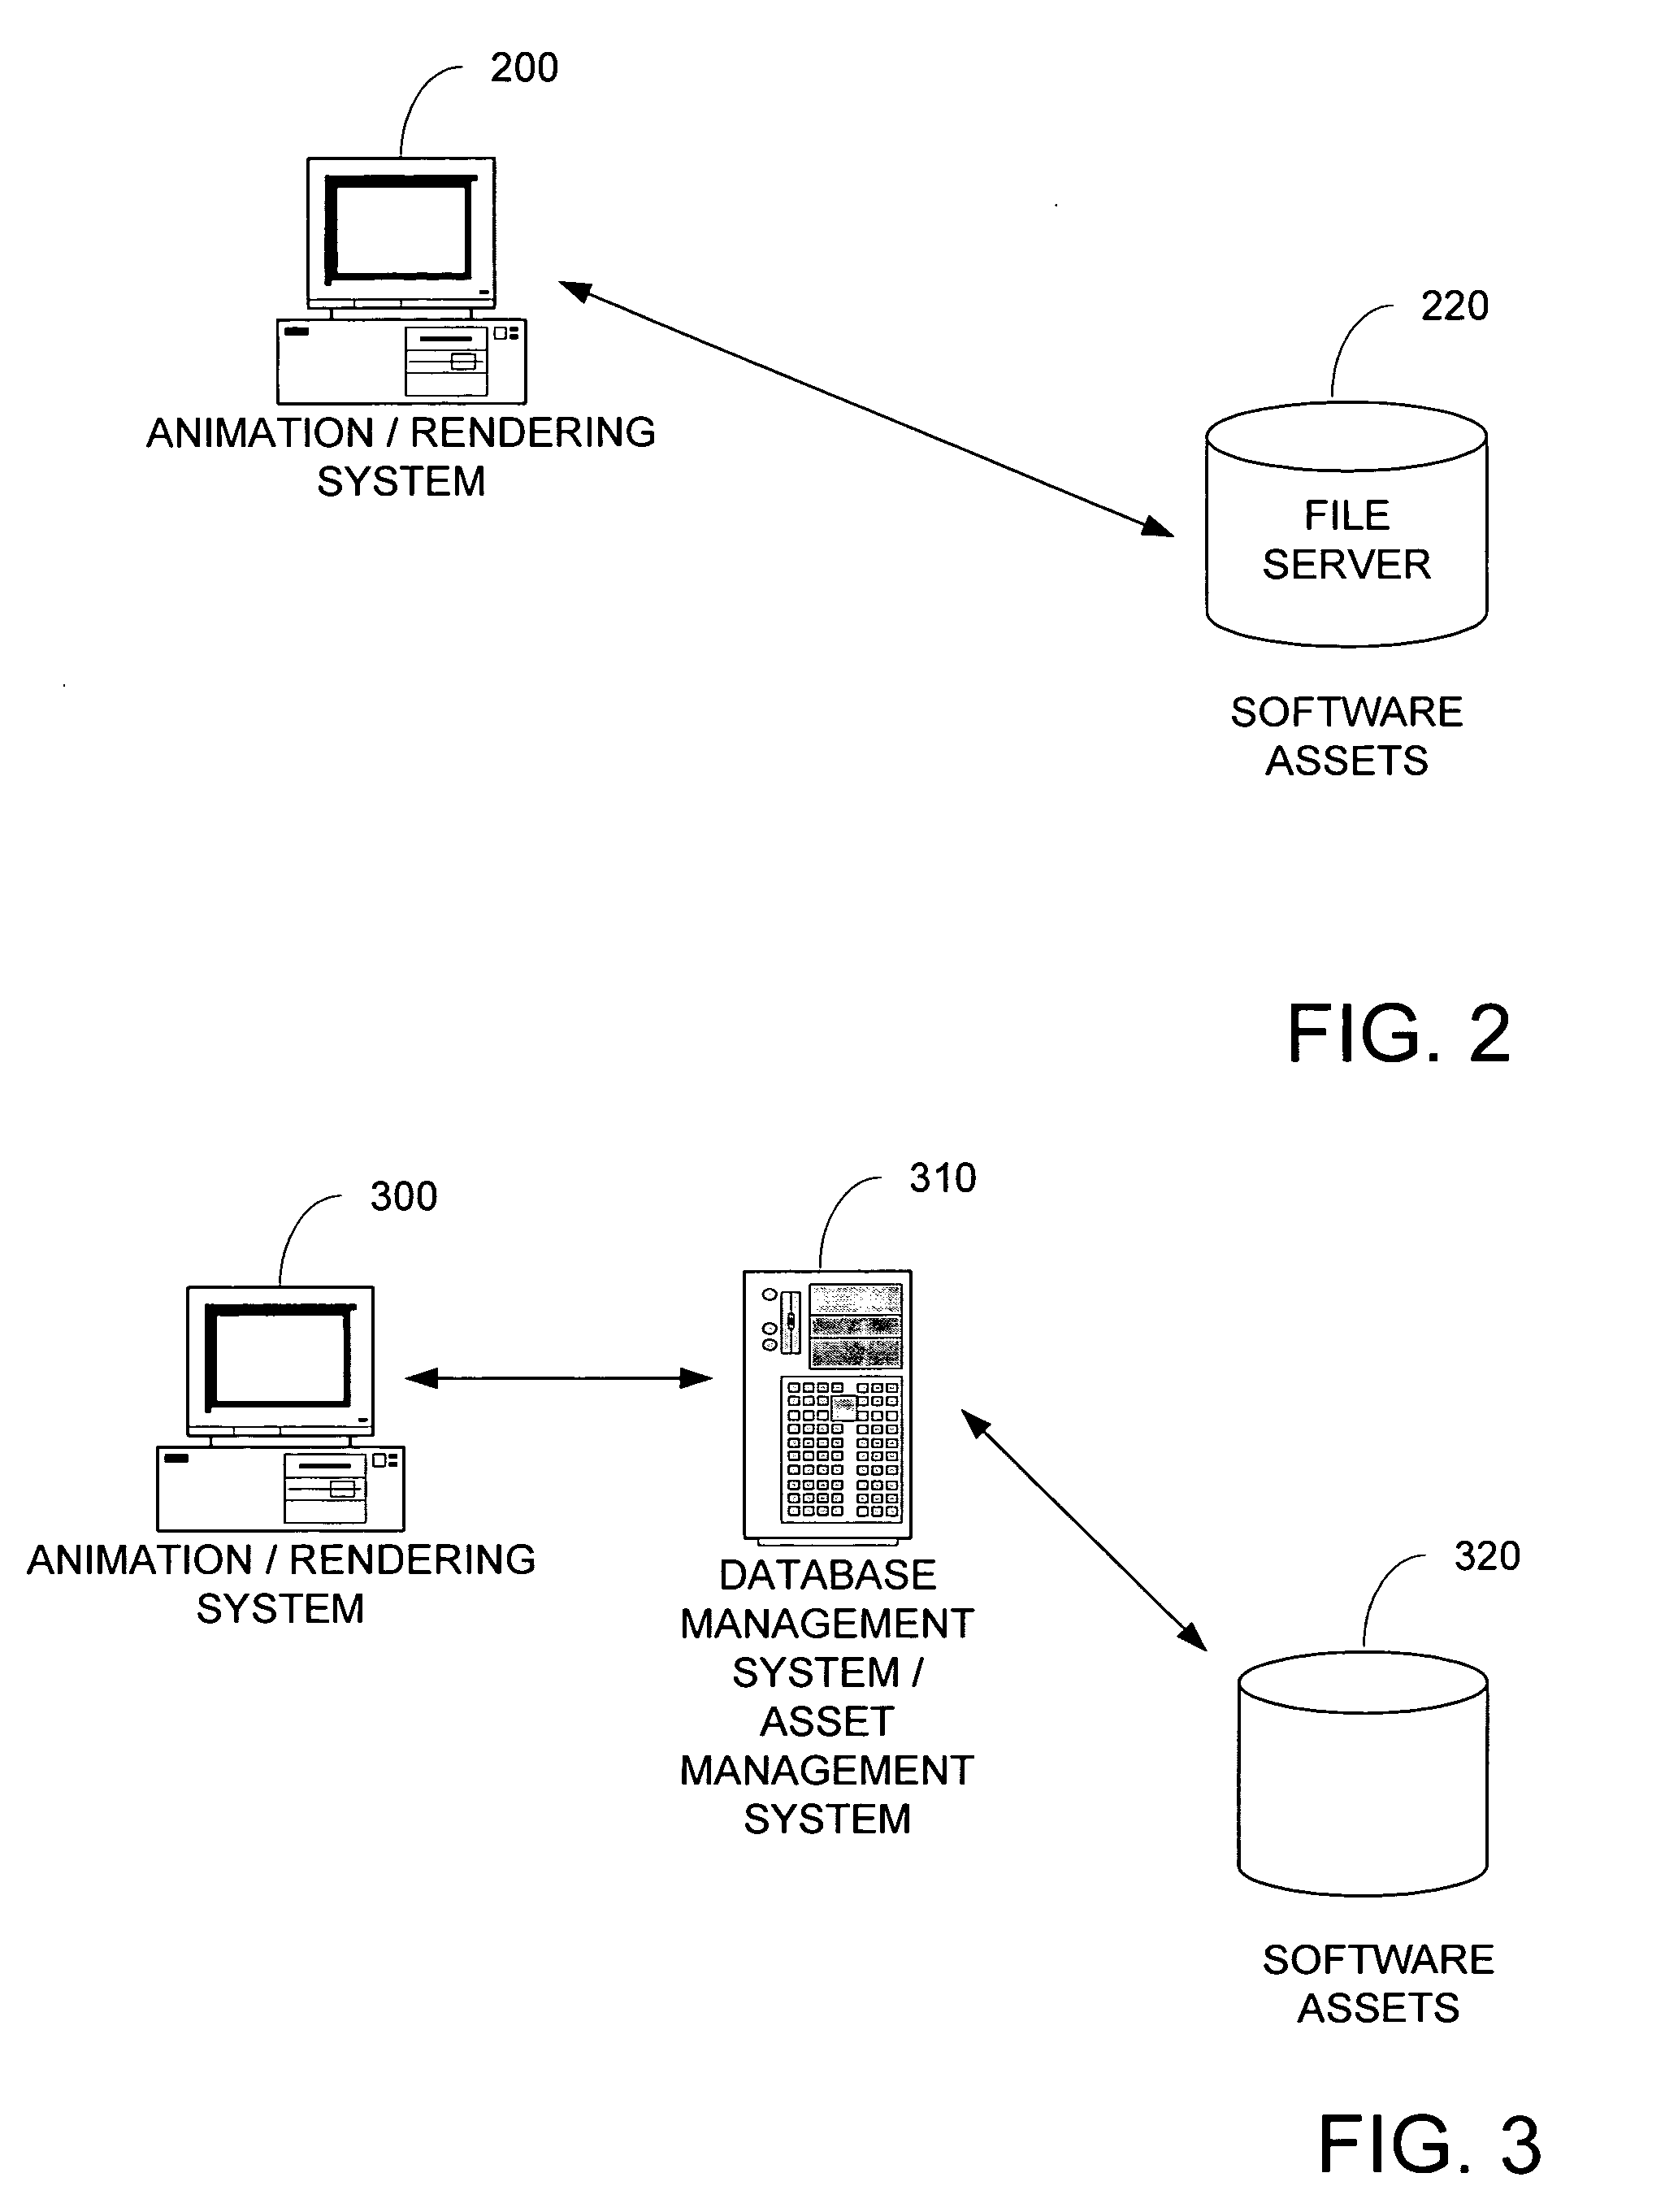 Manual component asset change isolation methods and apparatus